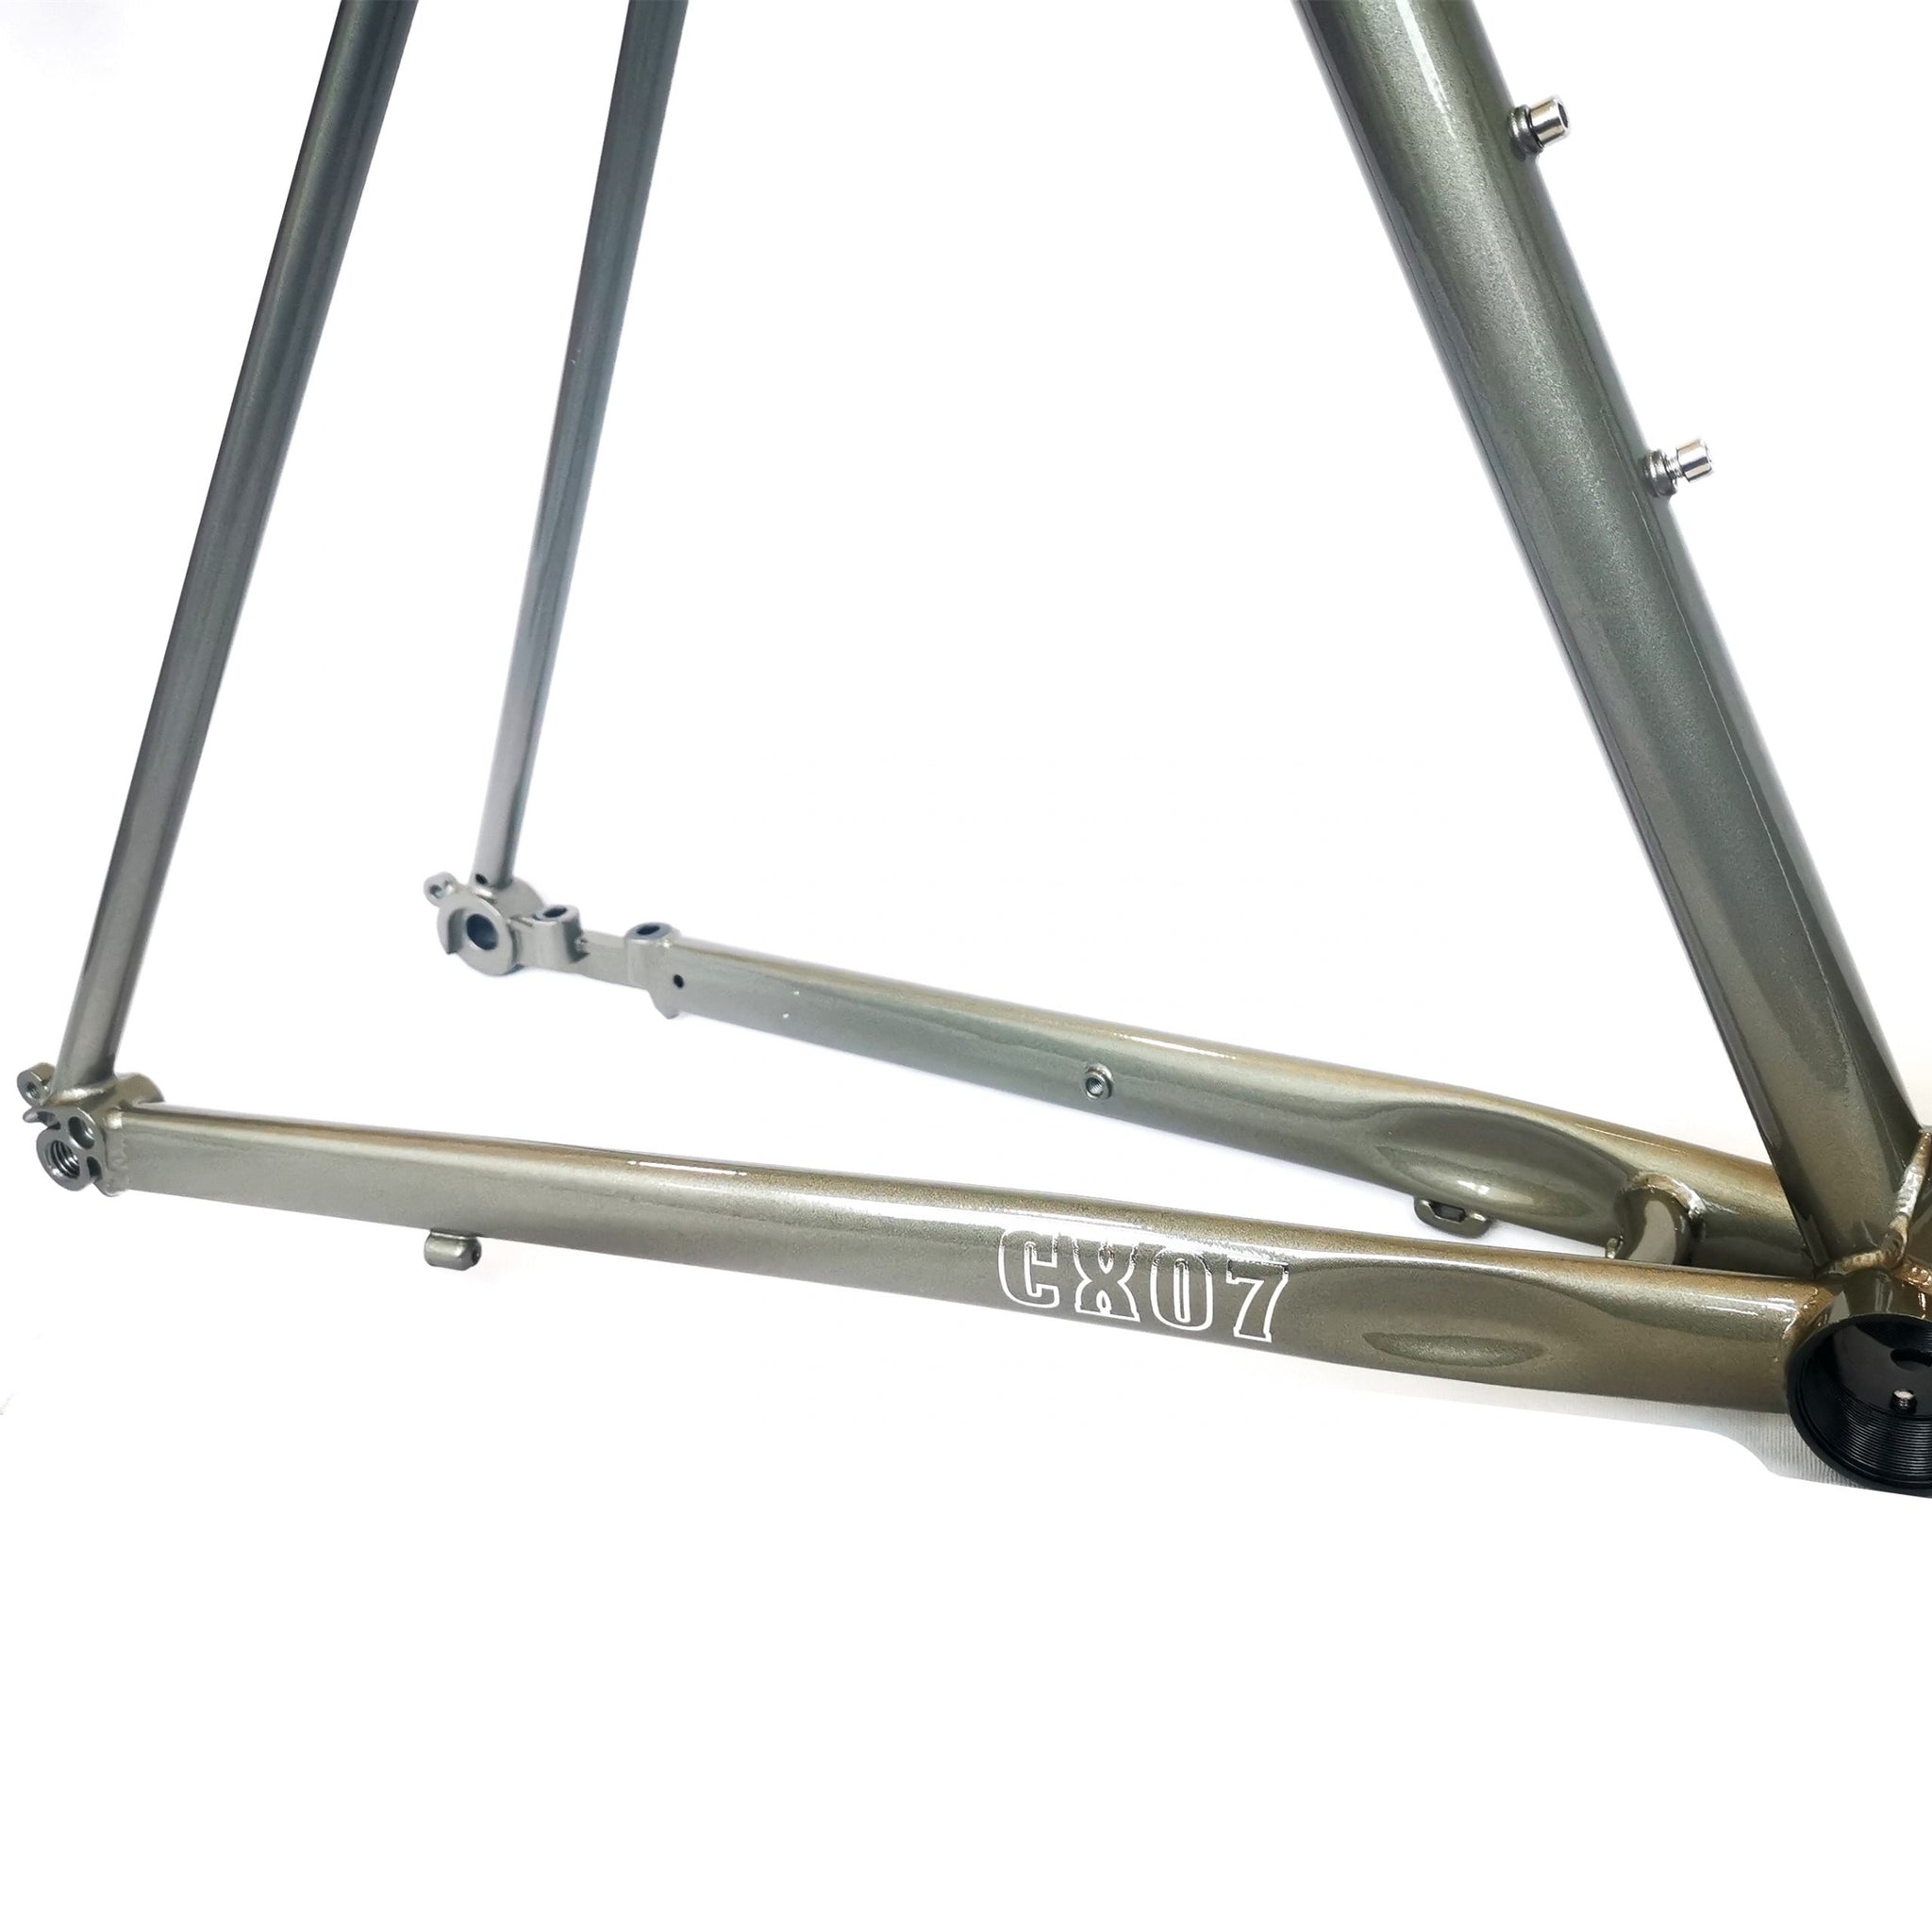 Seaboard CX07 Bicycle Frames 1100.00 Atelier Olympia